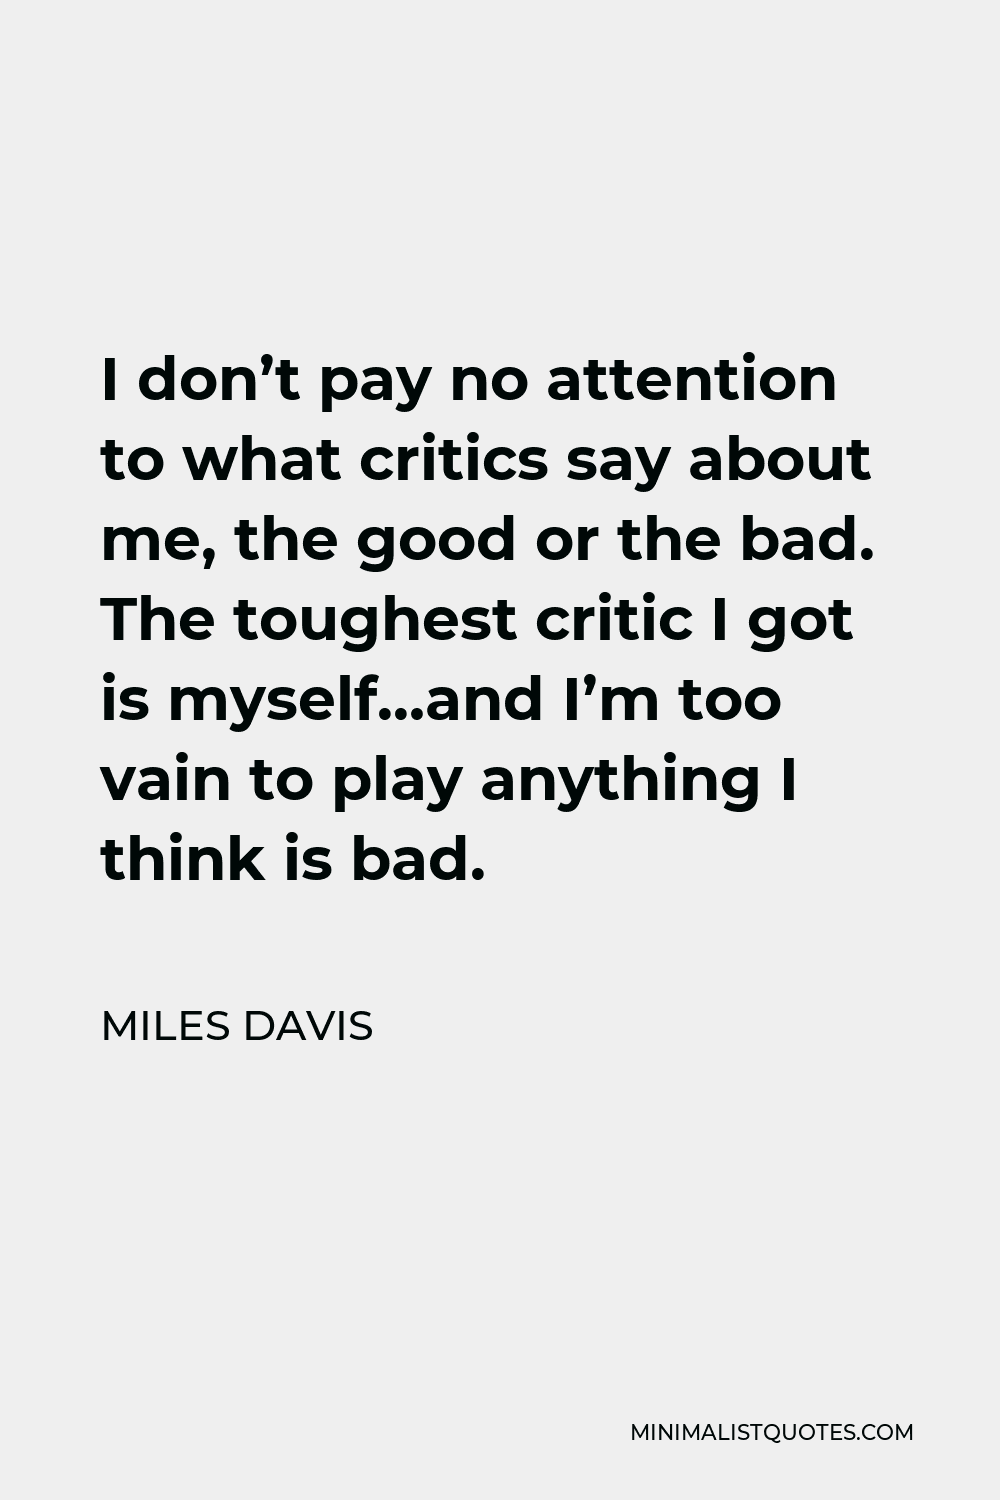 Miles Davis Quote - I don’t pay no attention to what critics say about me, the good or the bad. The toughest critic I got is myself…and I’m too vain to play anything I think is bad.